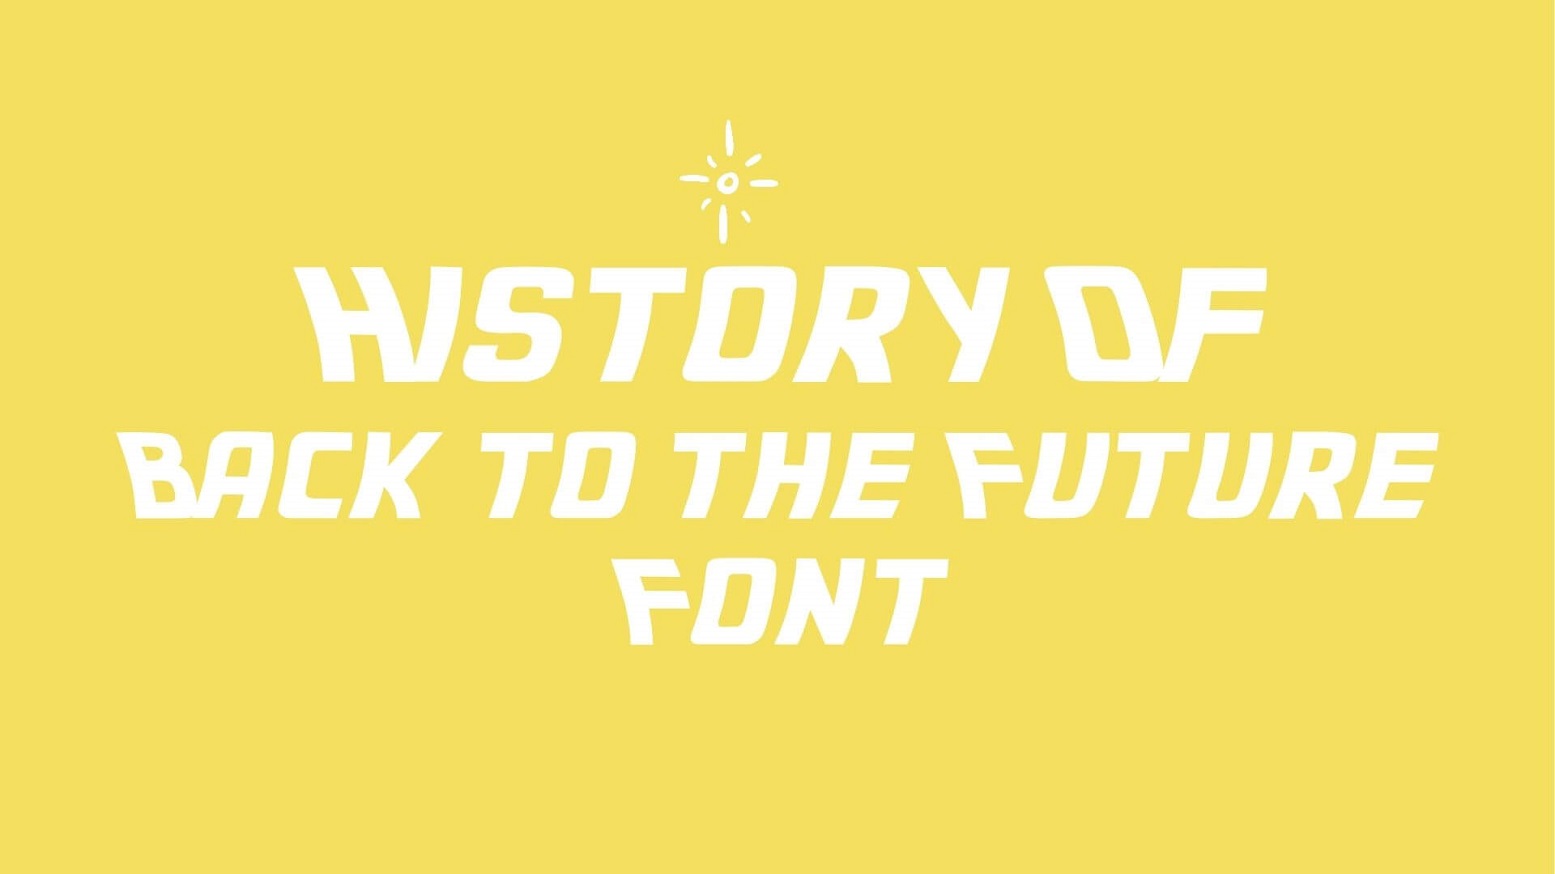 History of Back to the Future Font